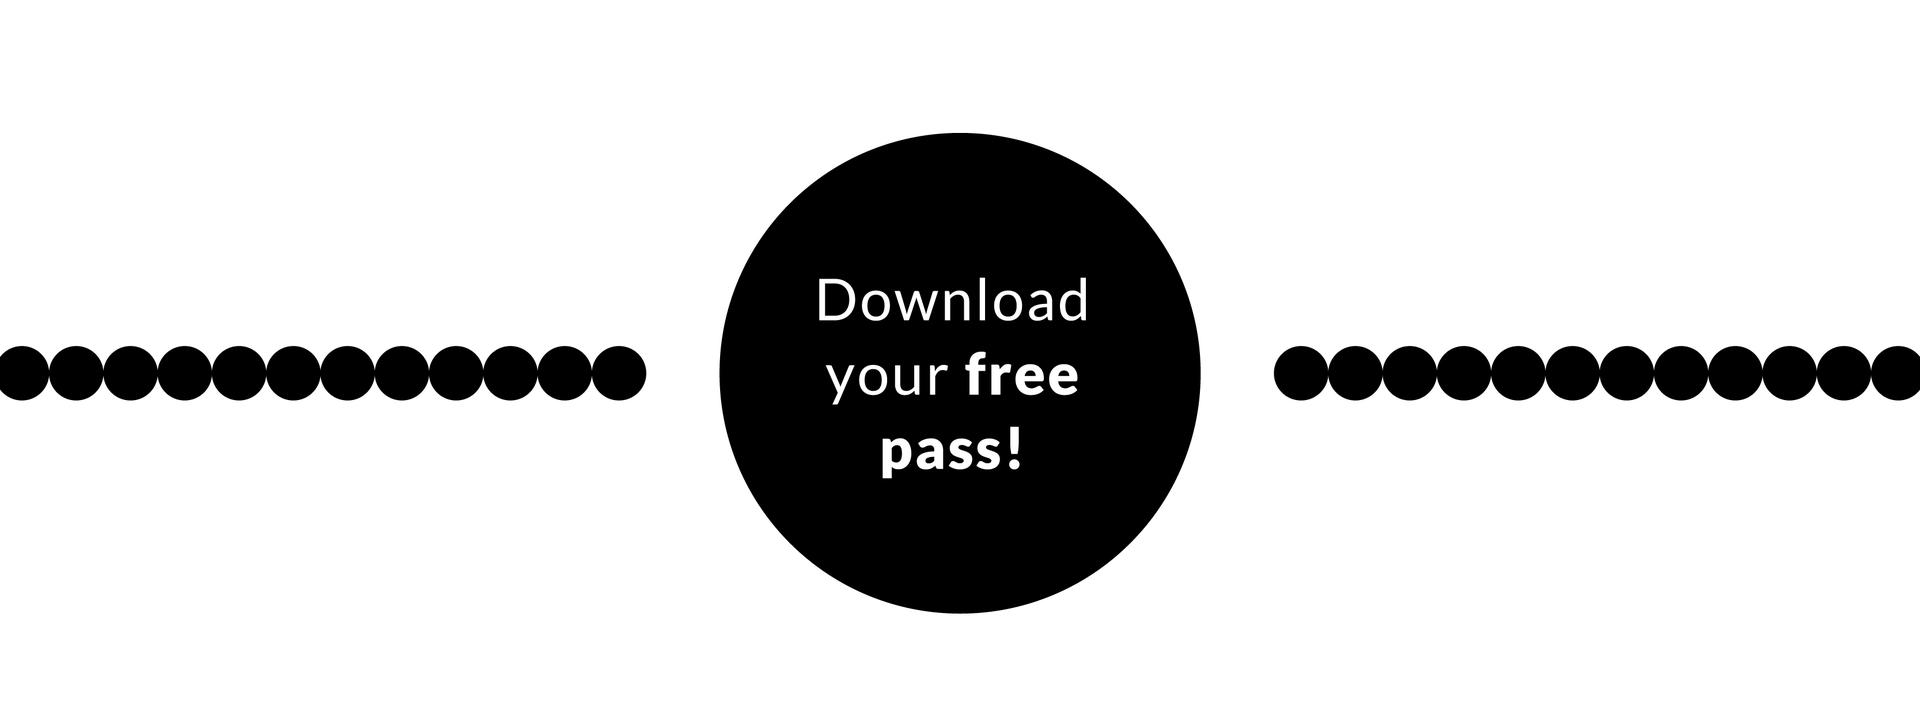 Download your free pass!